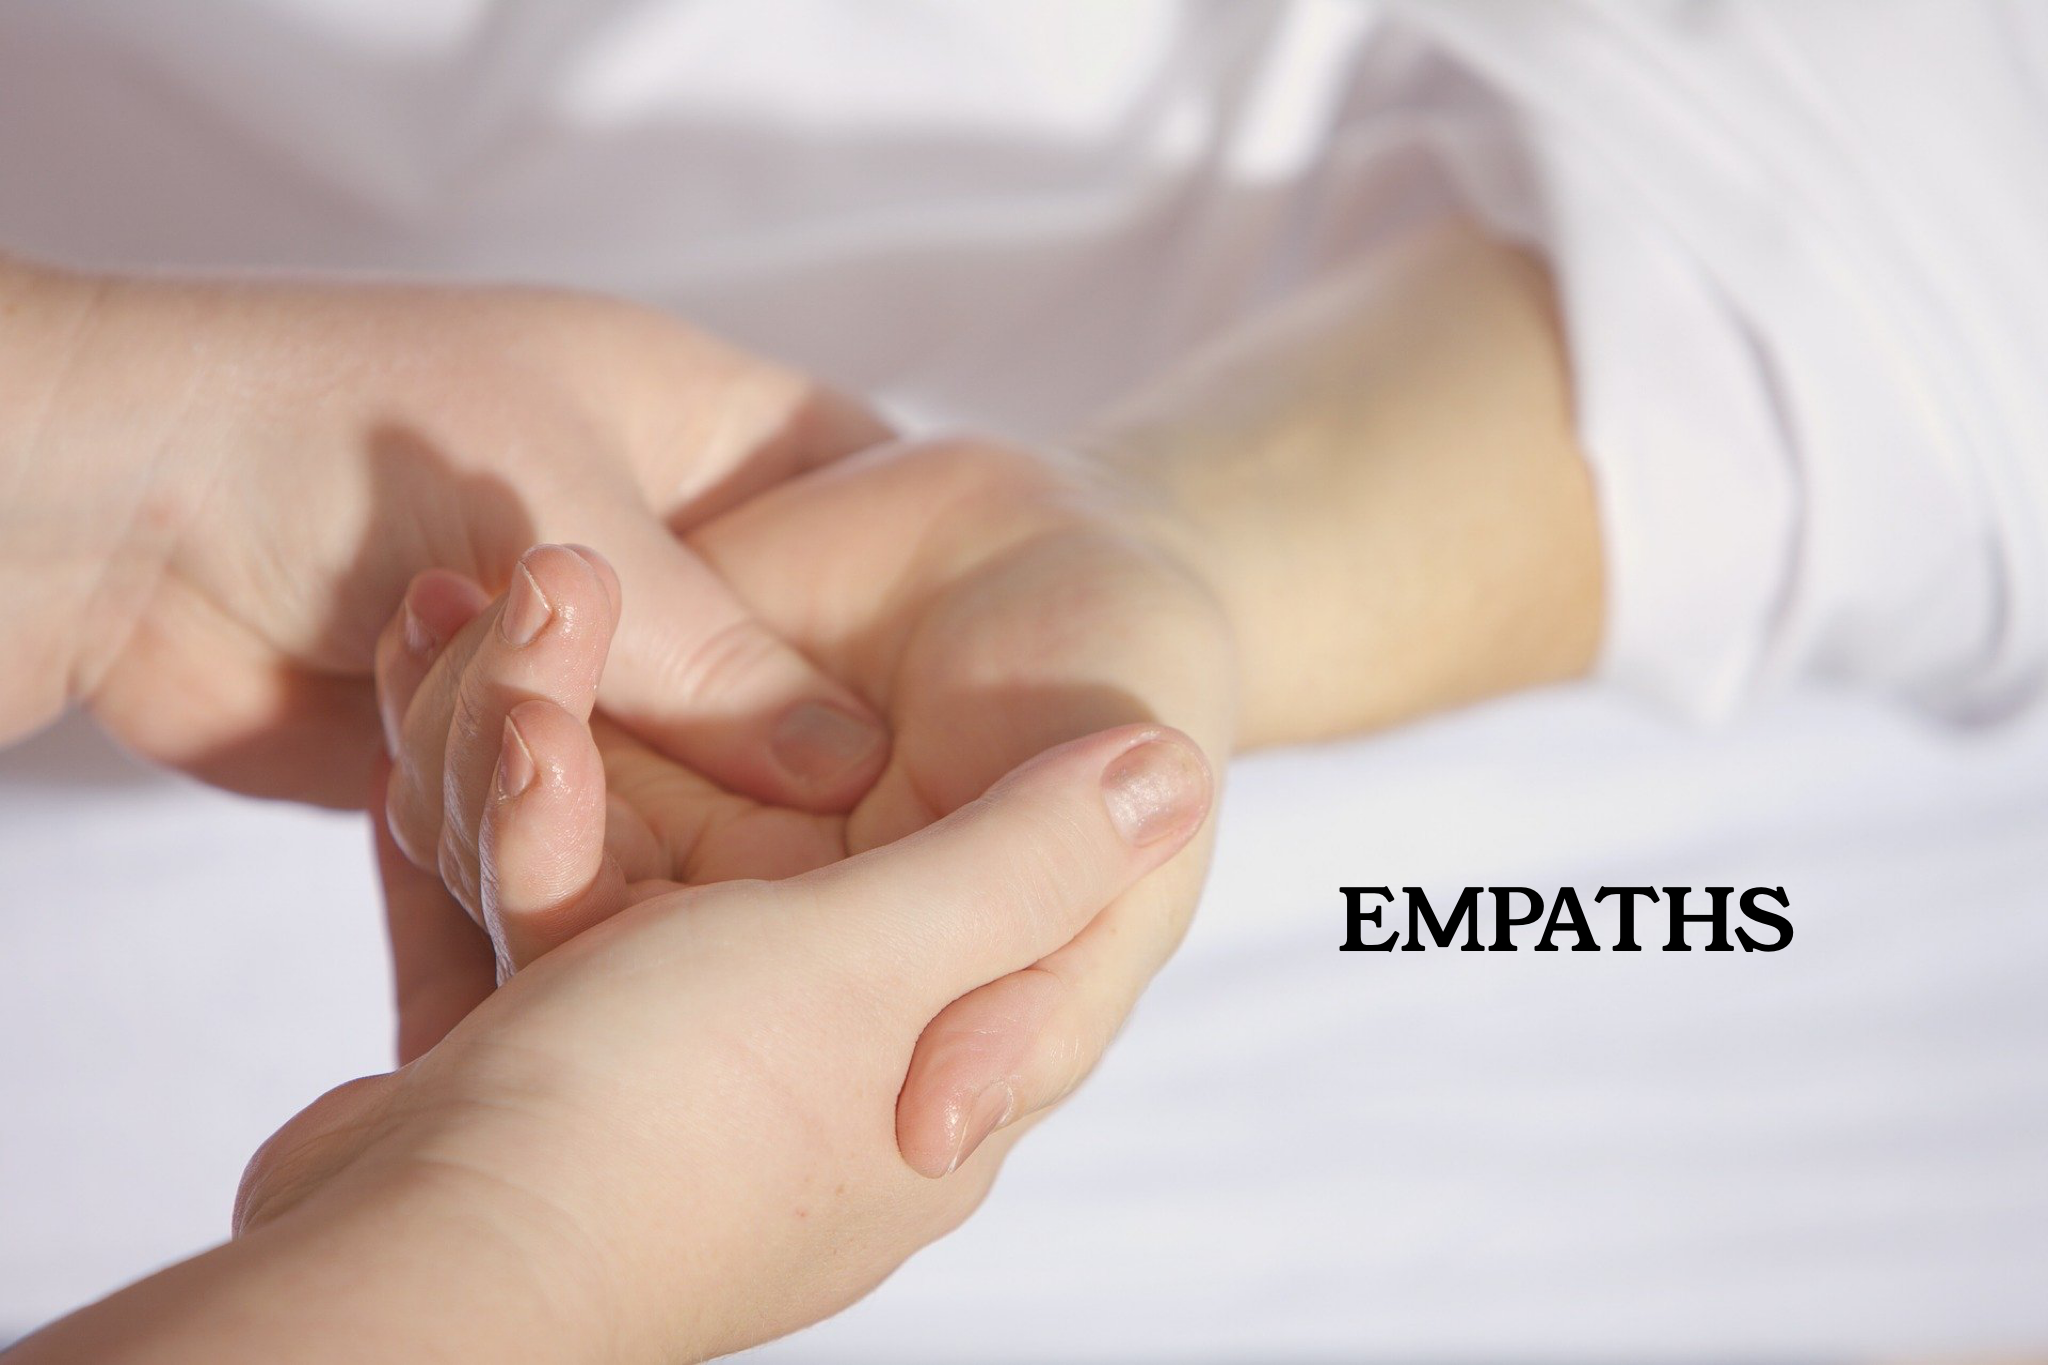 5 questions to ask yourself to see if you are an empath